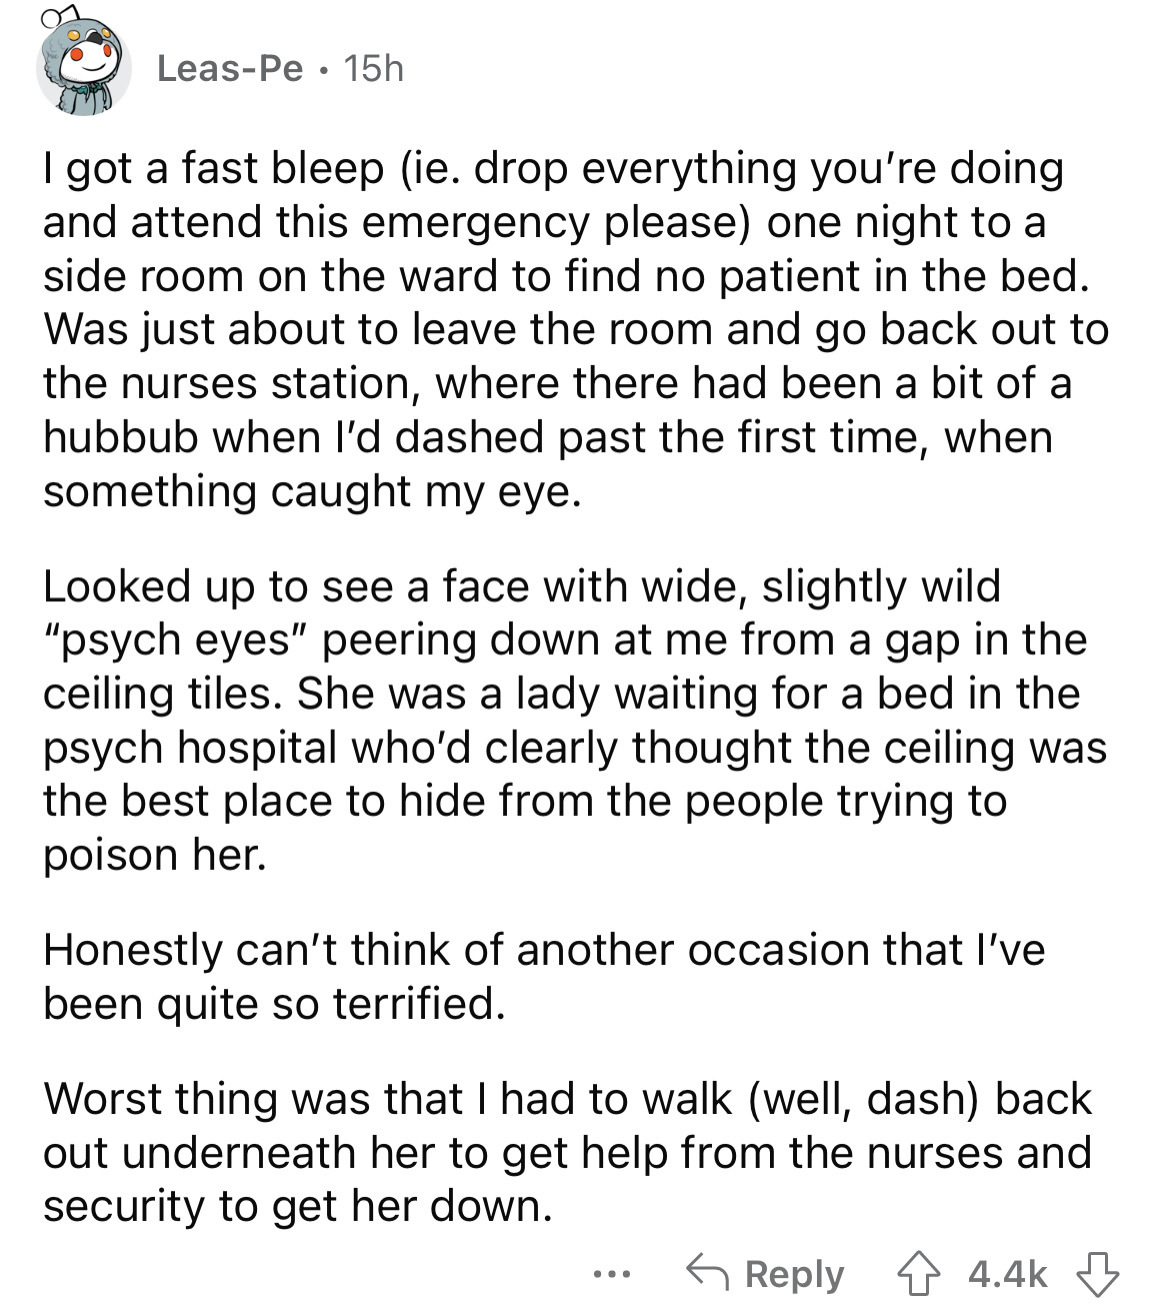 angle - LeasPe 15h I got a fast bleep ie. drop everything you're doing and attend this emergency please one night to a side room on the ward to find no patient in the bed. Was just about to leave the room and go back out to the nurses station, where there